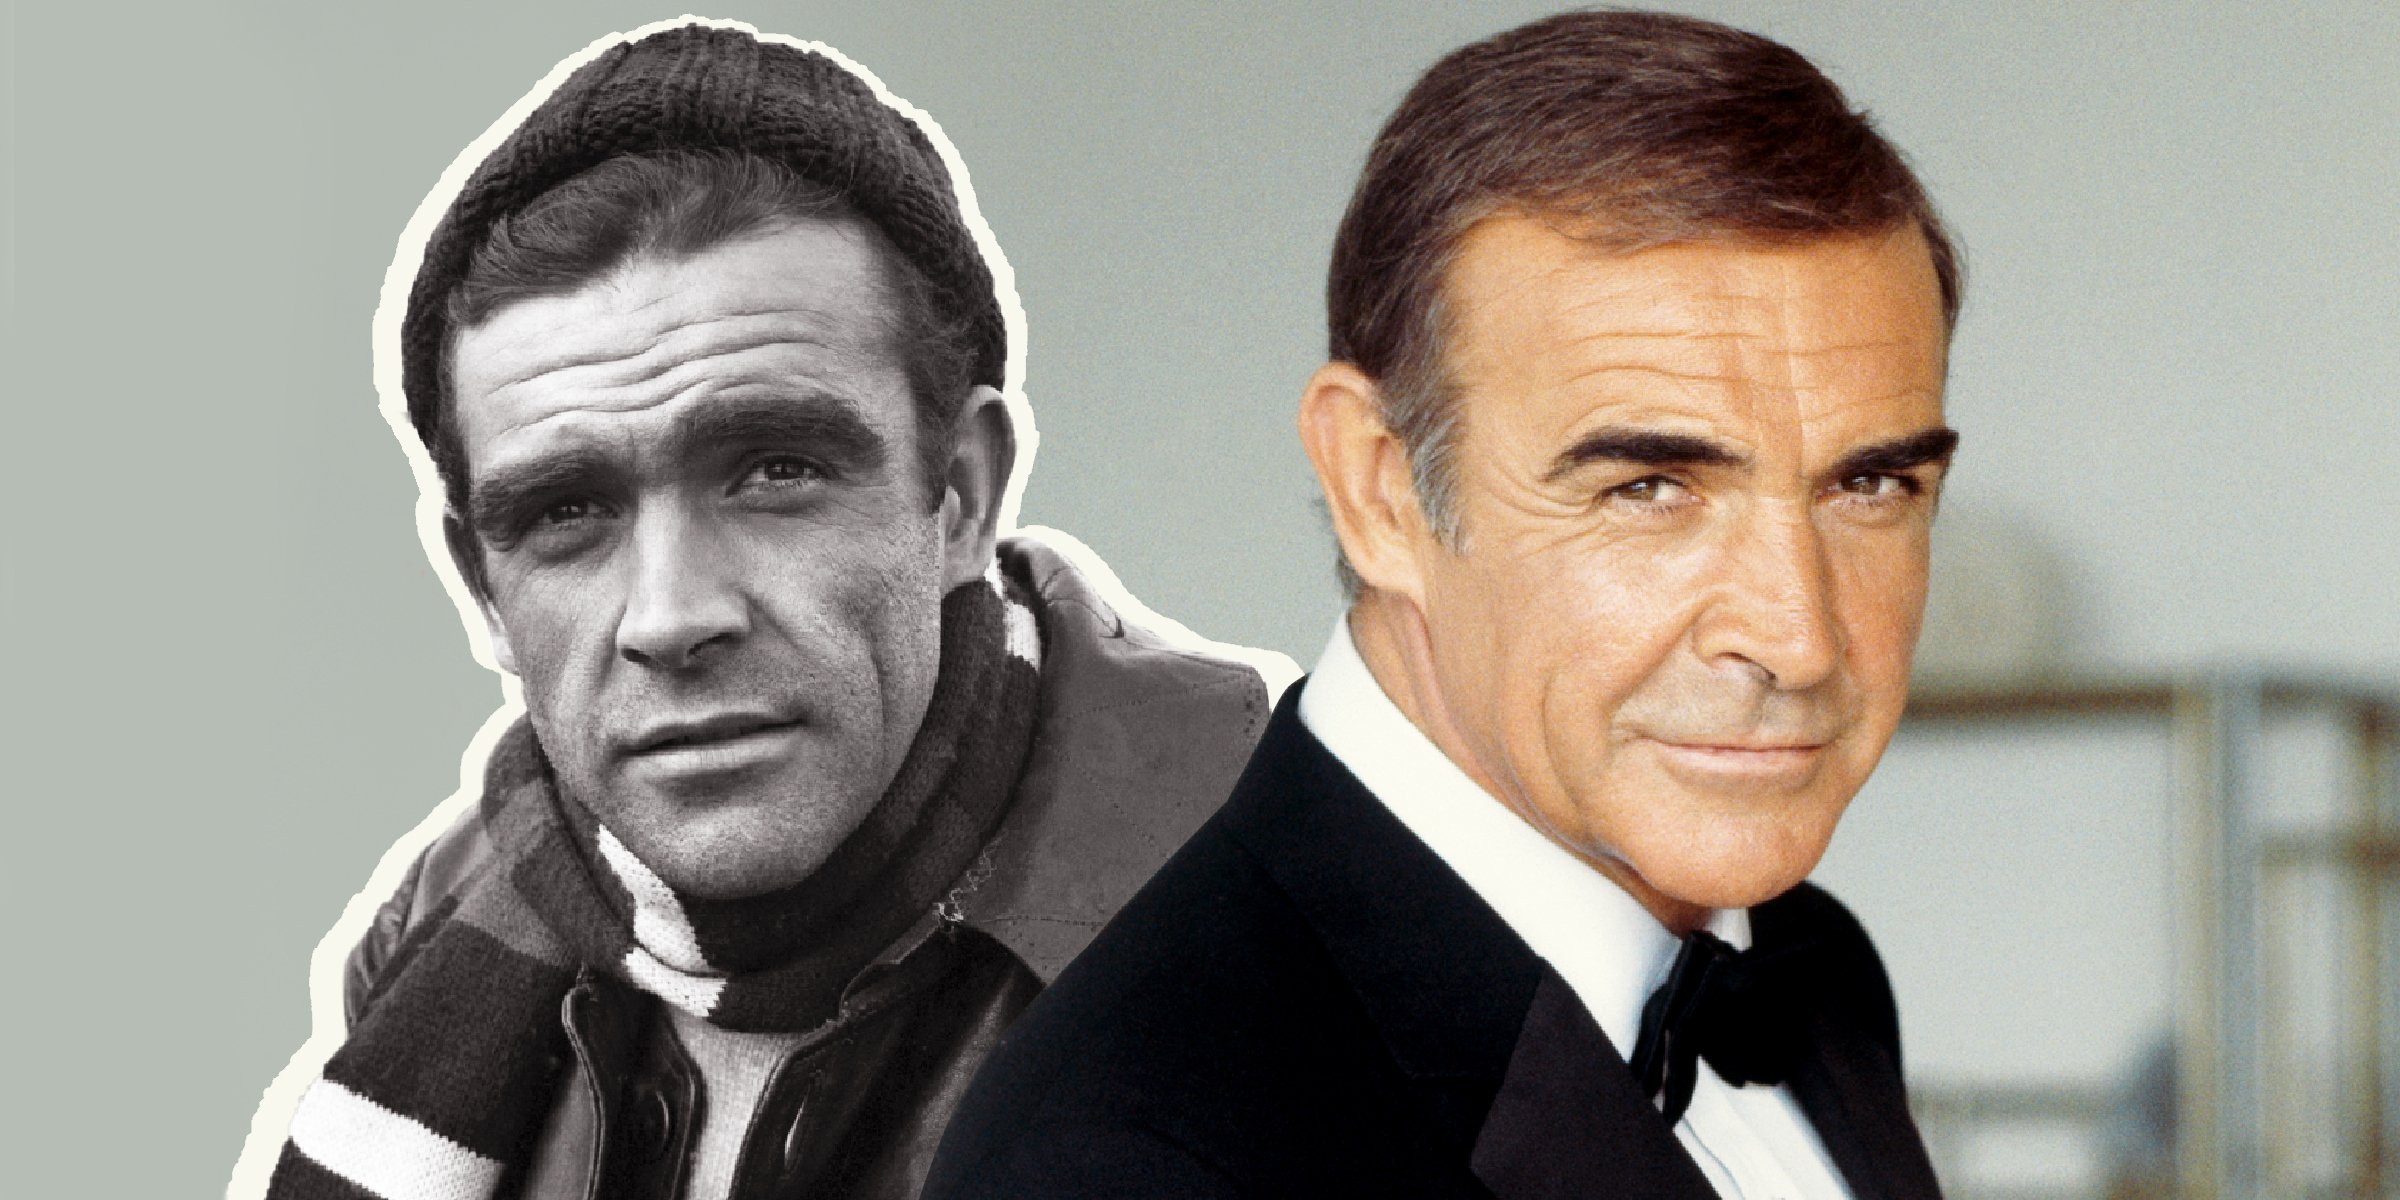 Sean Connery, 1950 | Sean Connery, 1982 | Source: Getty Images